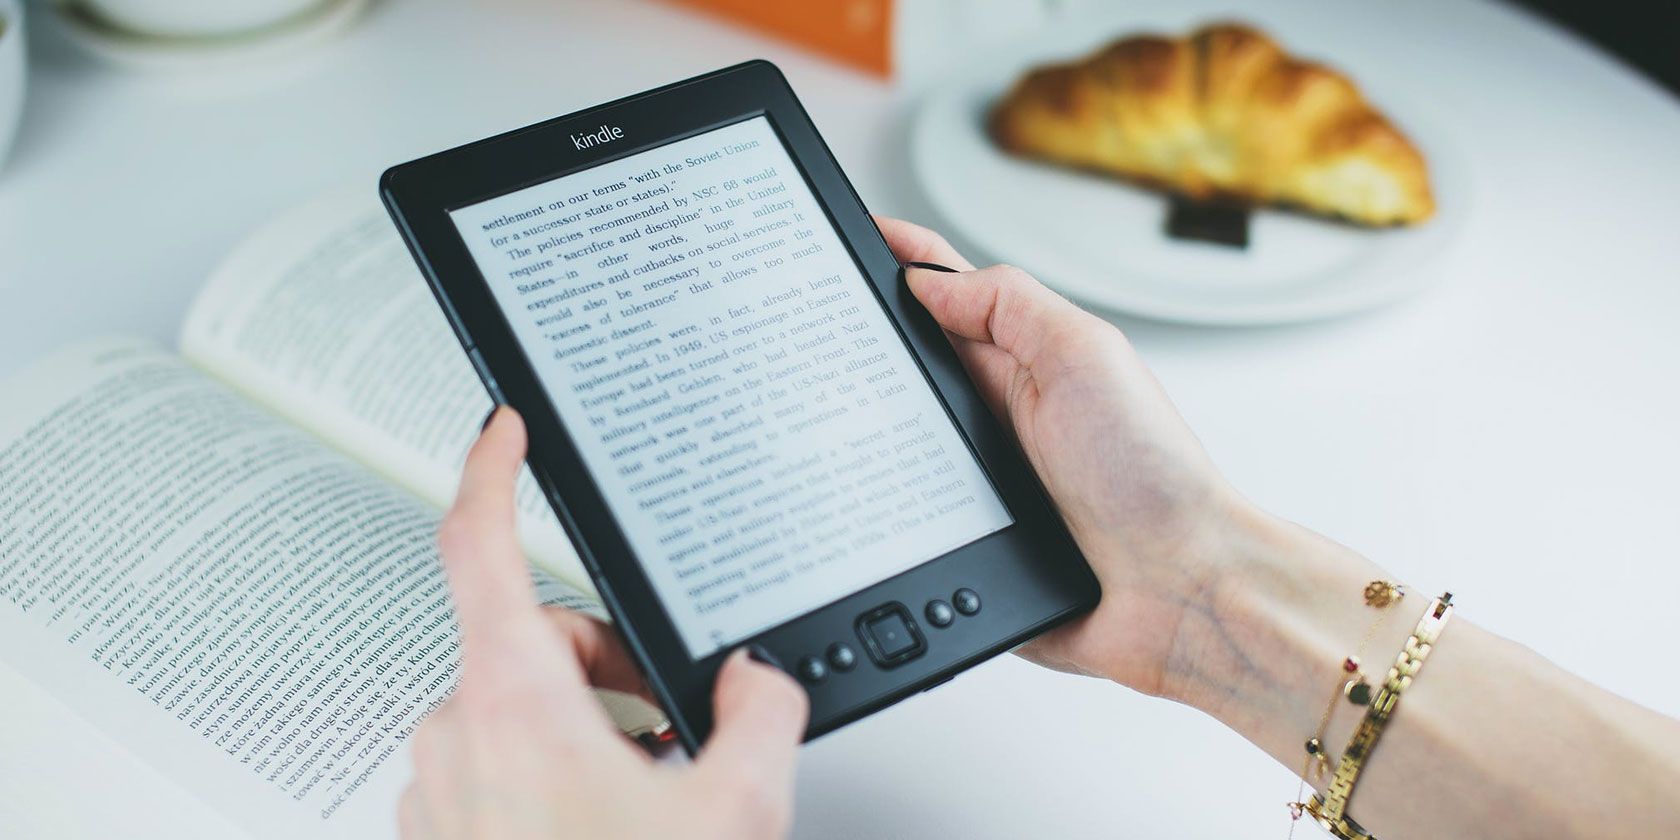 Hands holding an old Kindle model and reading a book